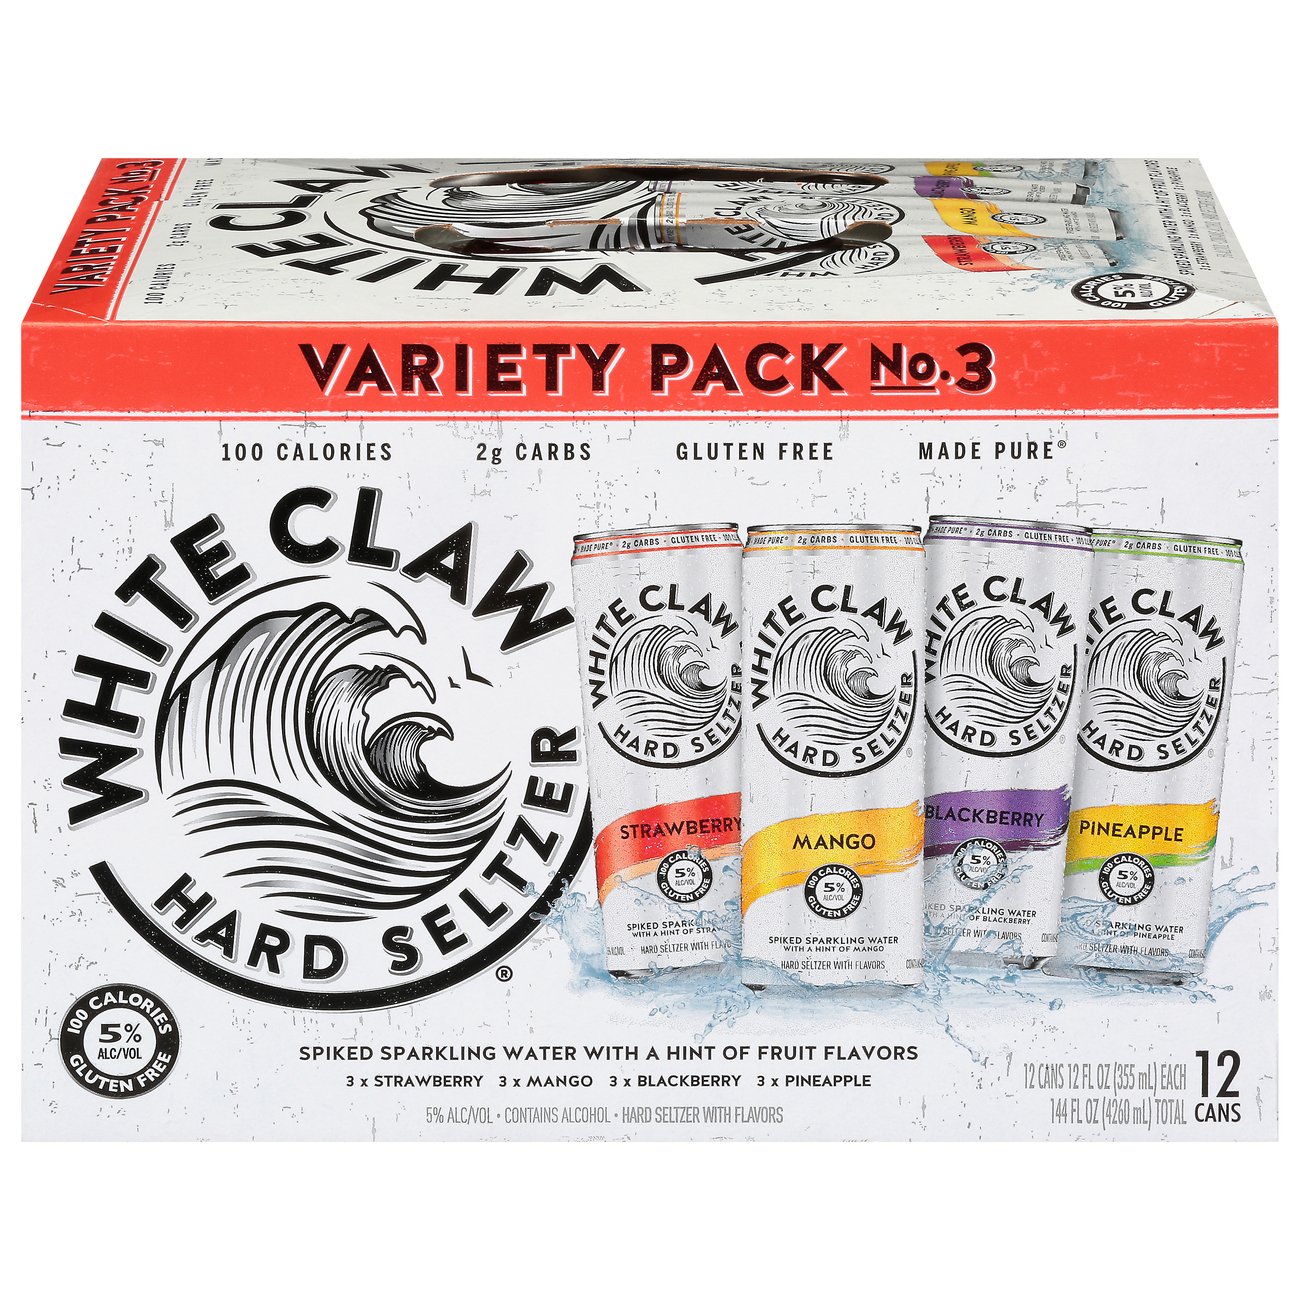 White Claw Hard Seltzer Variety Pack 12 pk Cans - Flavor Collection No. 3